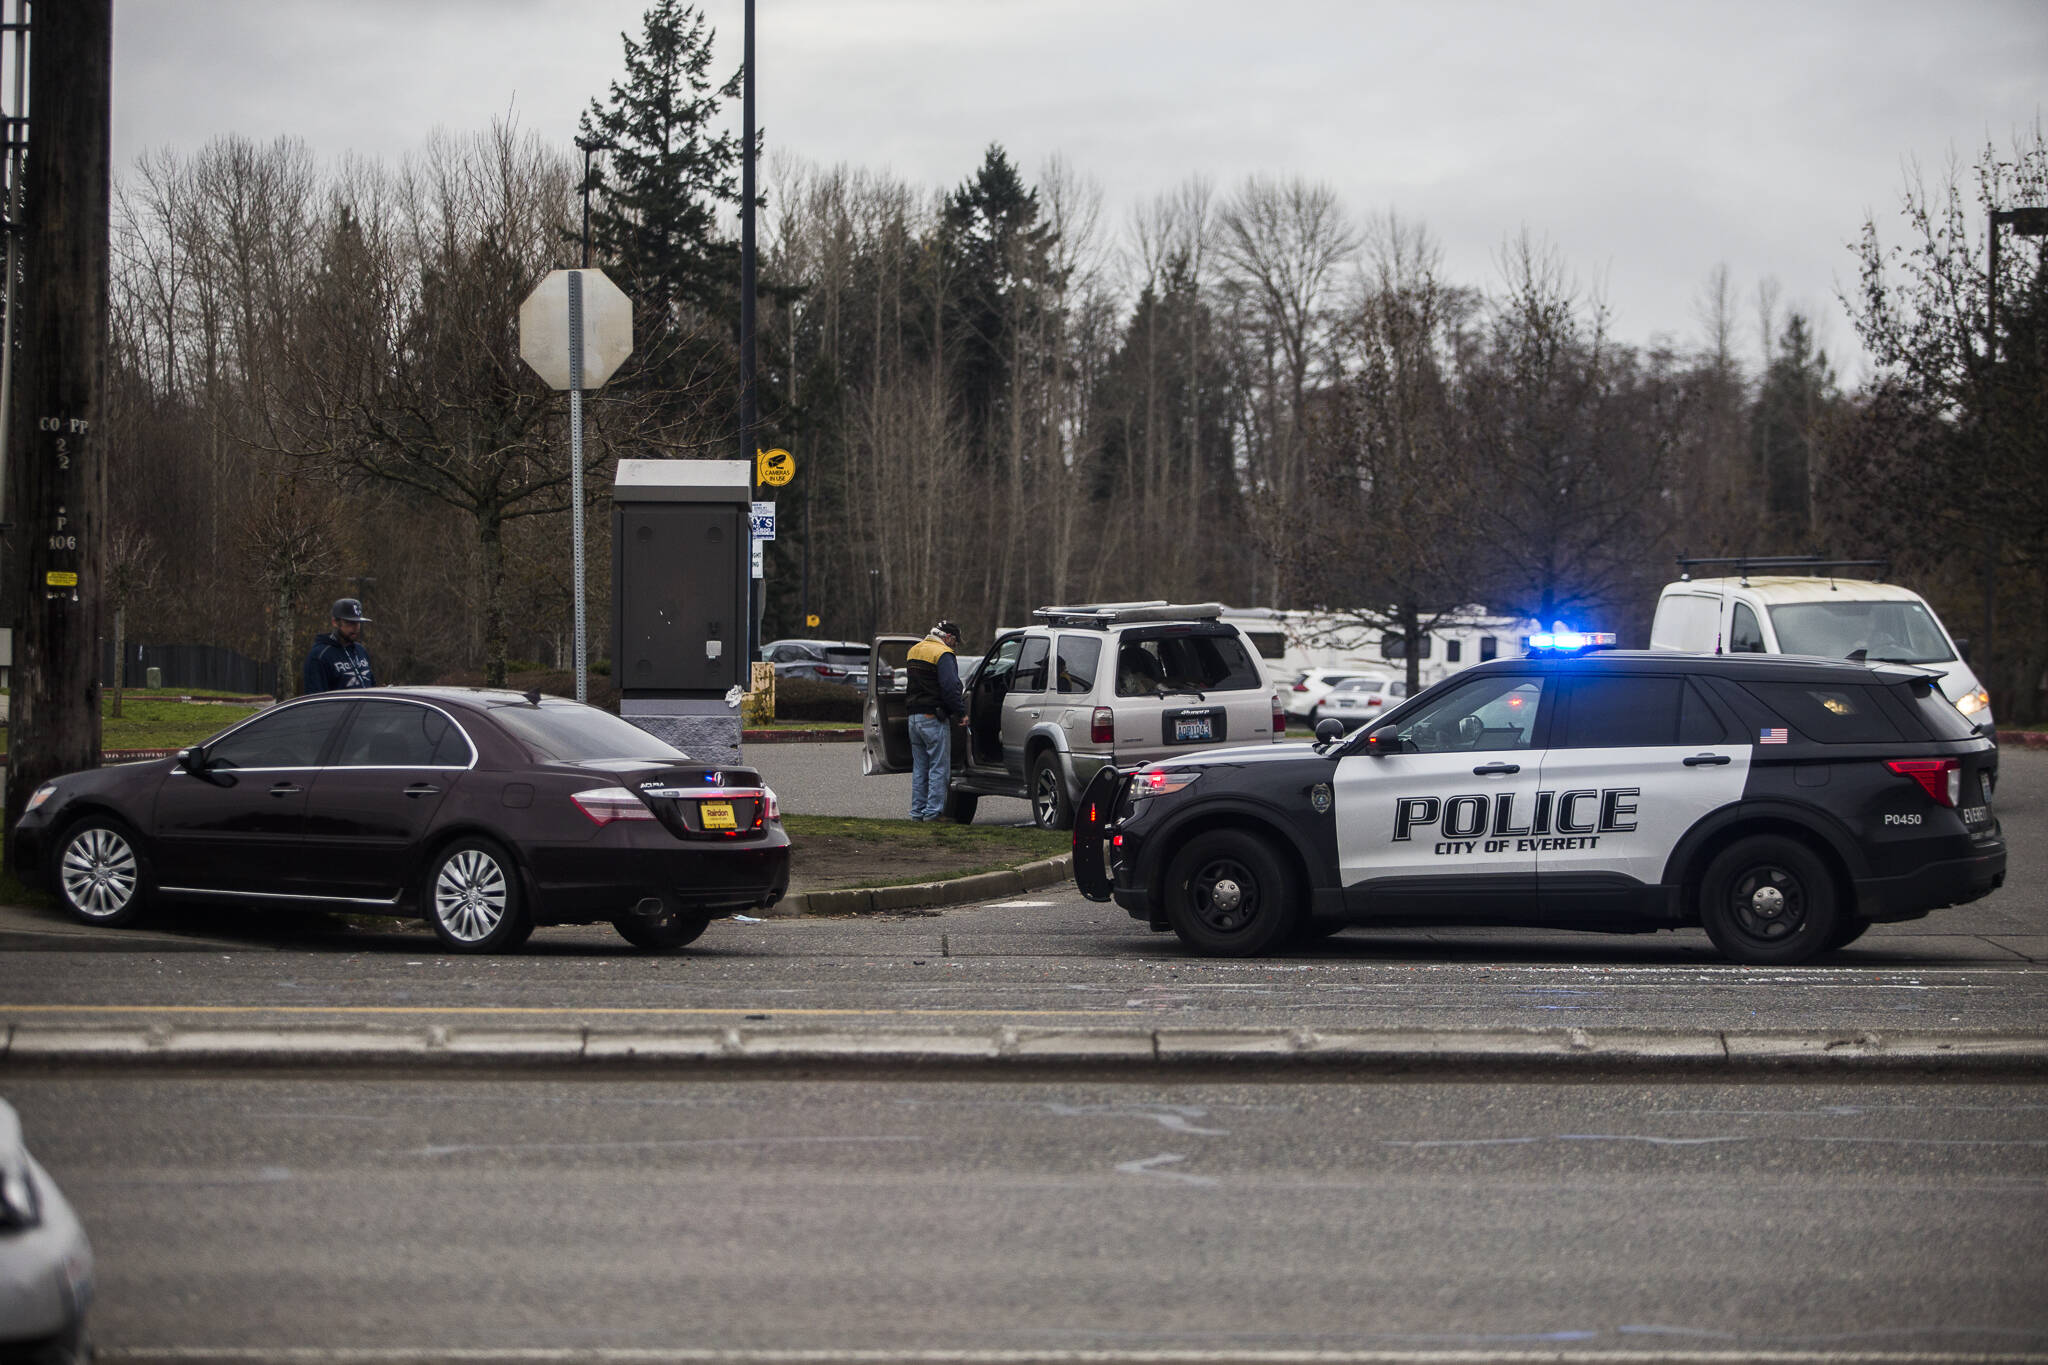 Everett Police respond to an accident along Highway 99 just north of Airport Road on Tuesday, Dec. 21, 2021 in Everett, Wa. (Olivia Vanni / The Herald)